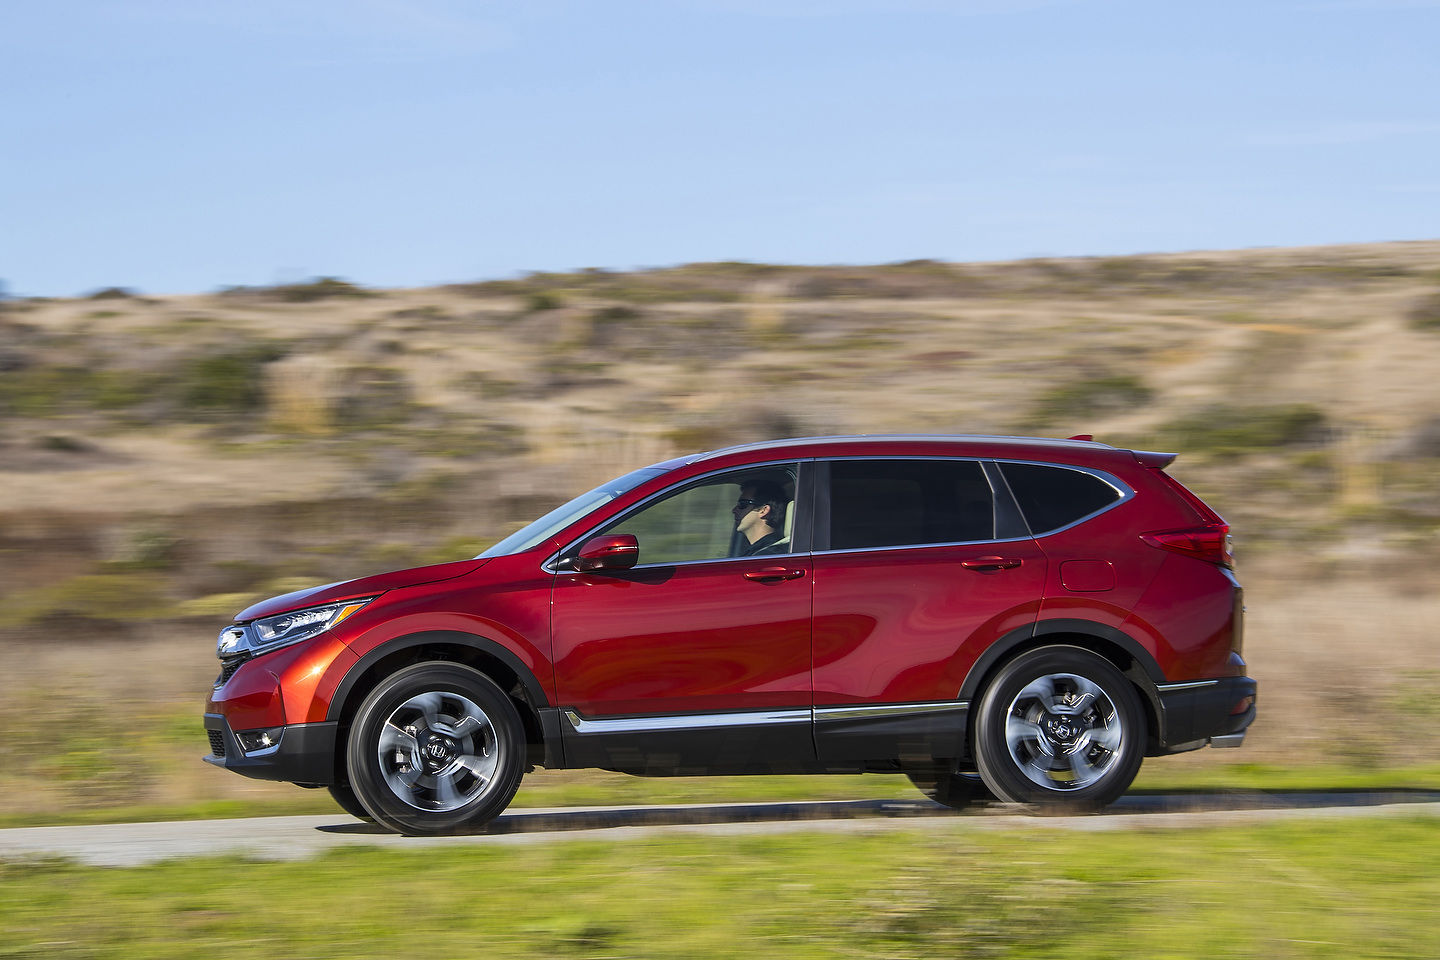 The 2019 Honda CR-V in all its versions